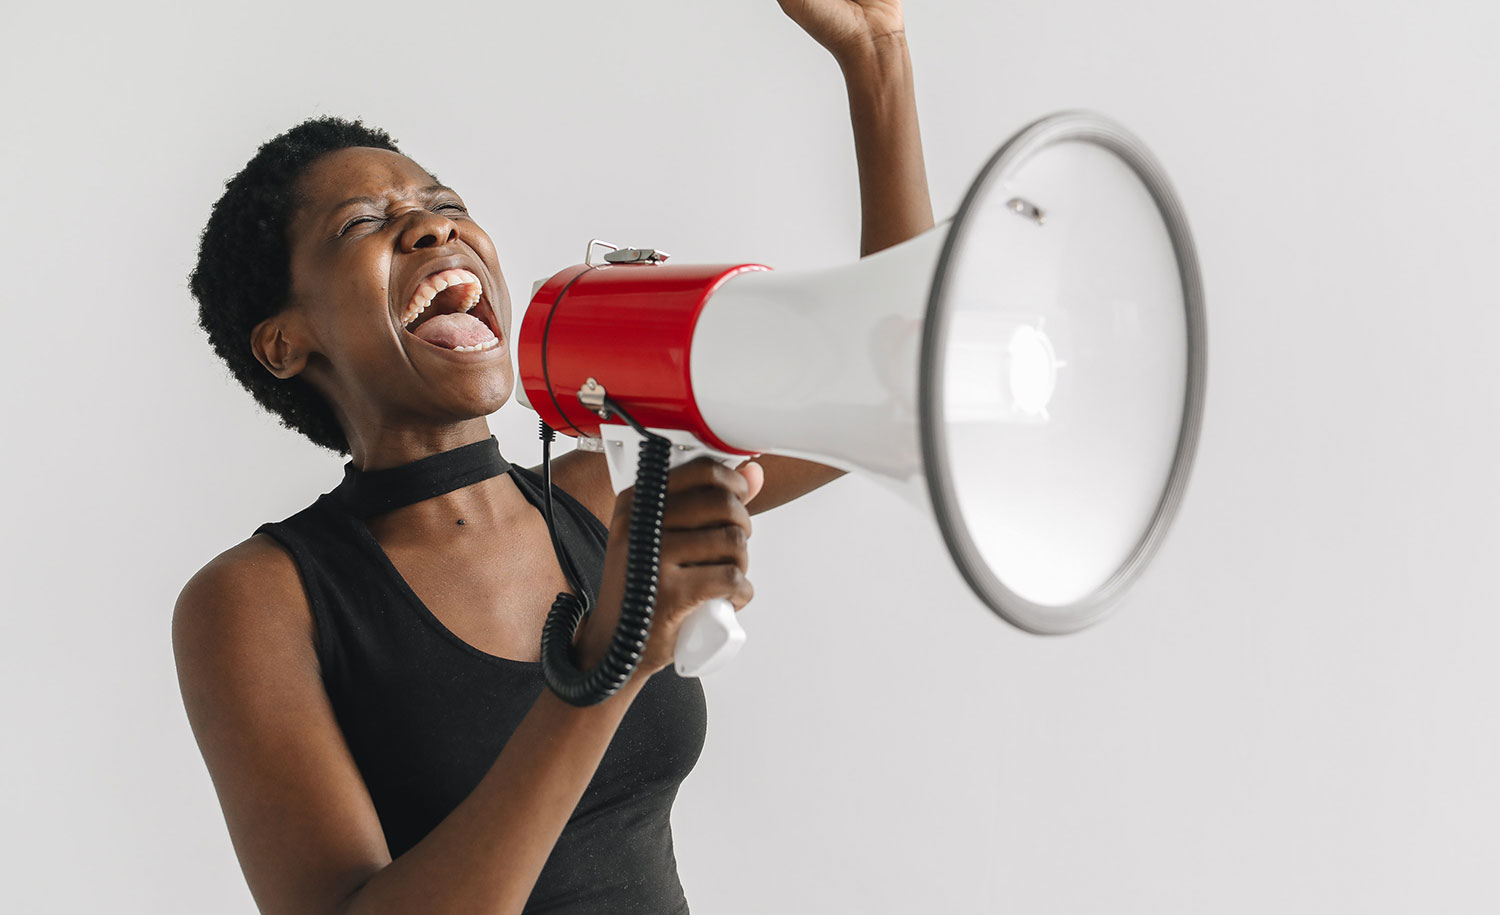 An HSP uses her voice to speak into a megaphone